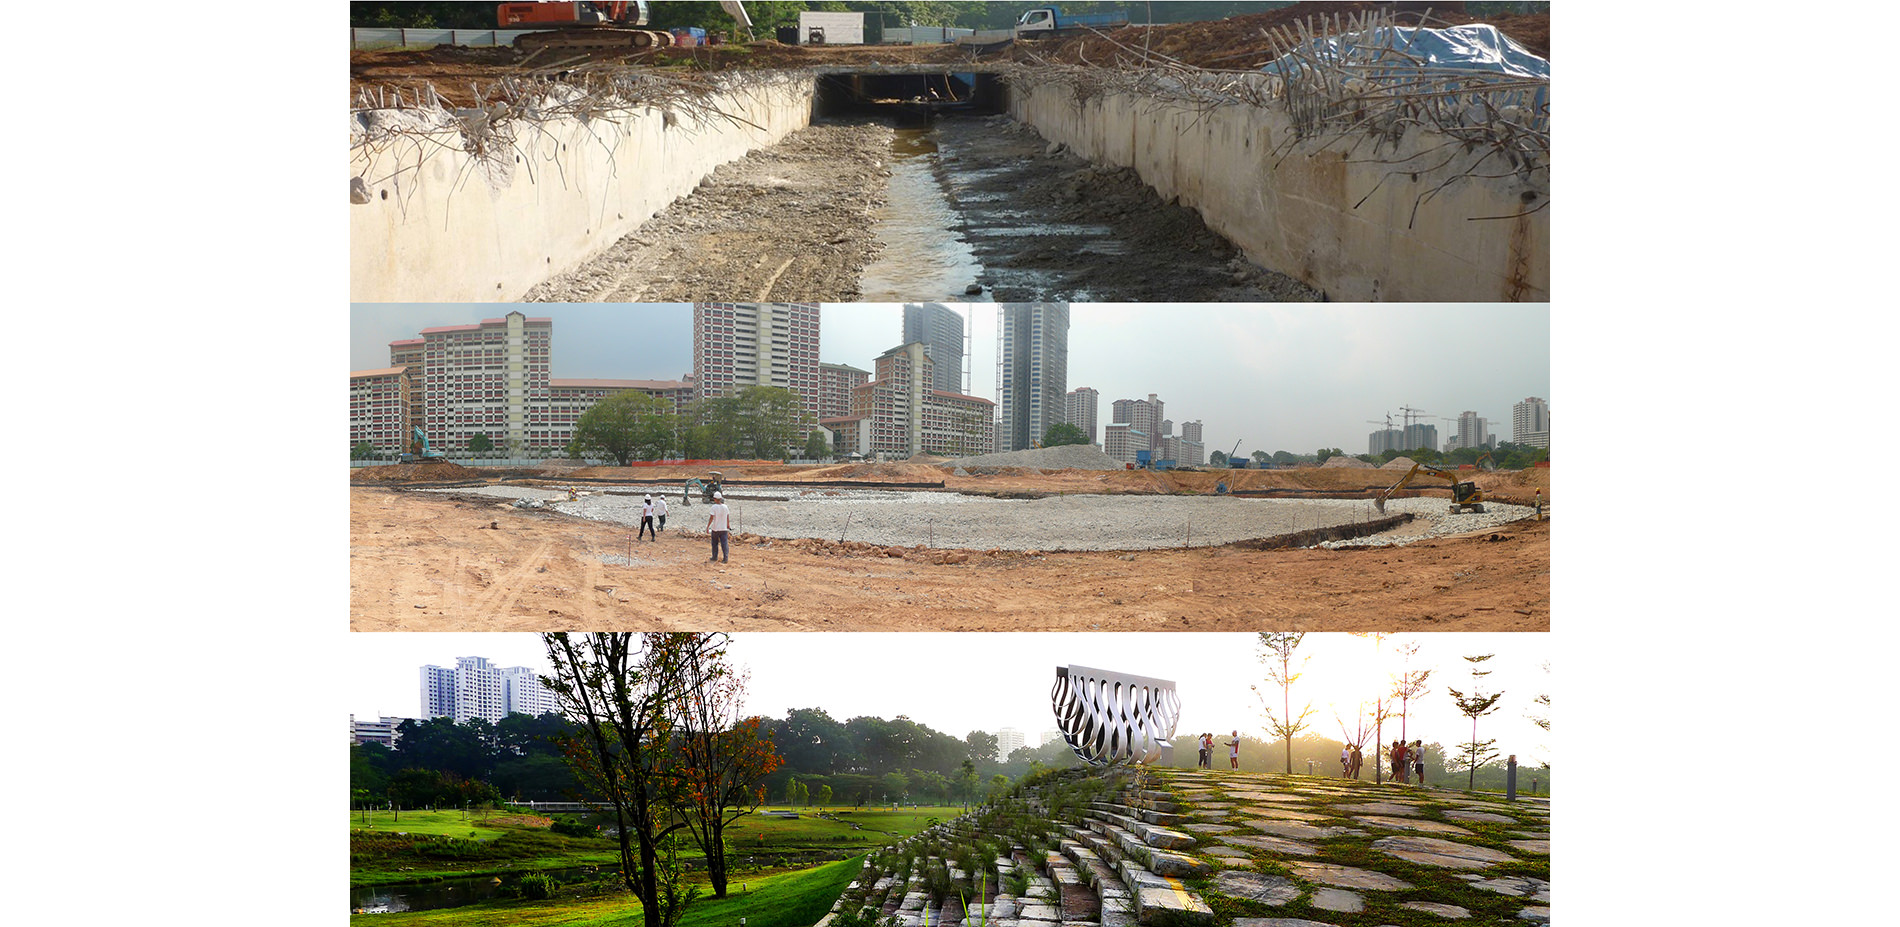 Photos Showing How Concrete was Reused